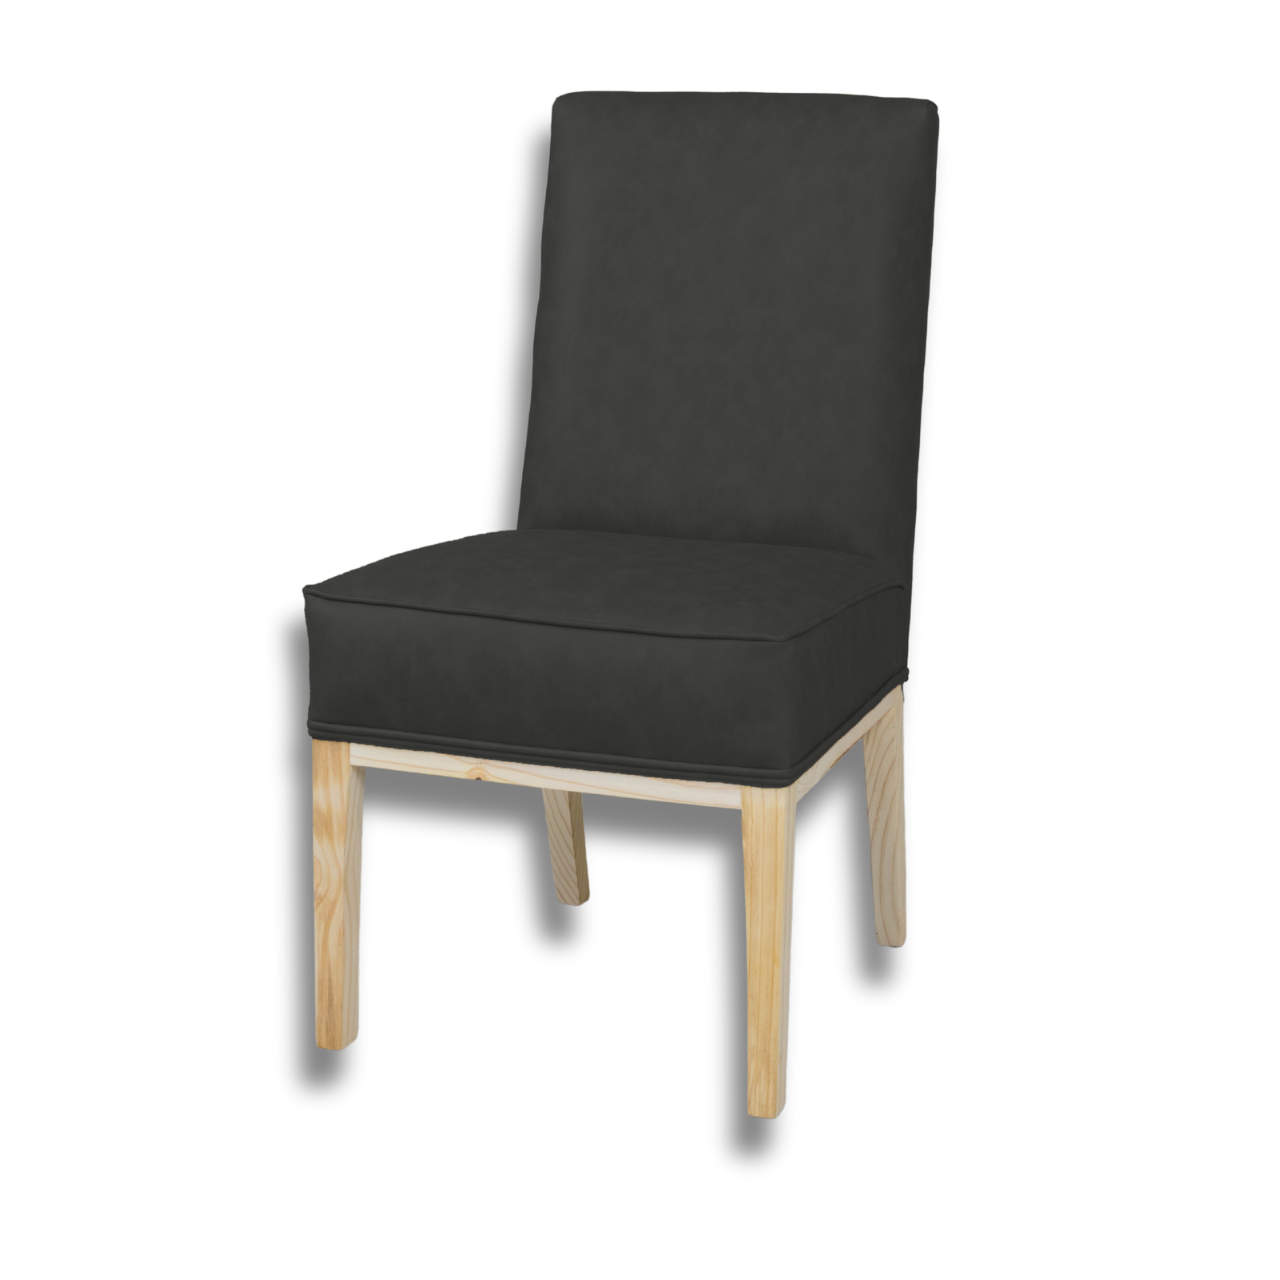 CLASSIC DINING CHAIR